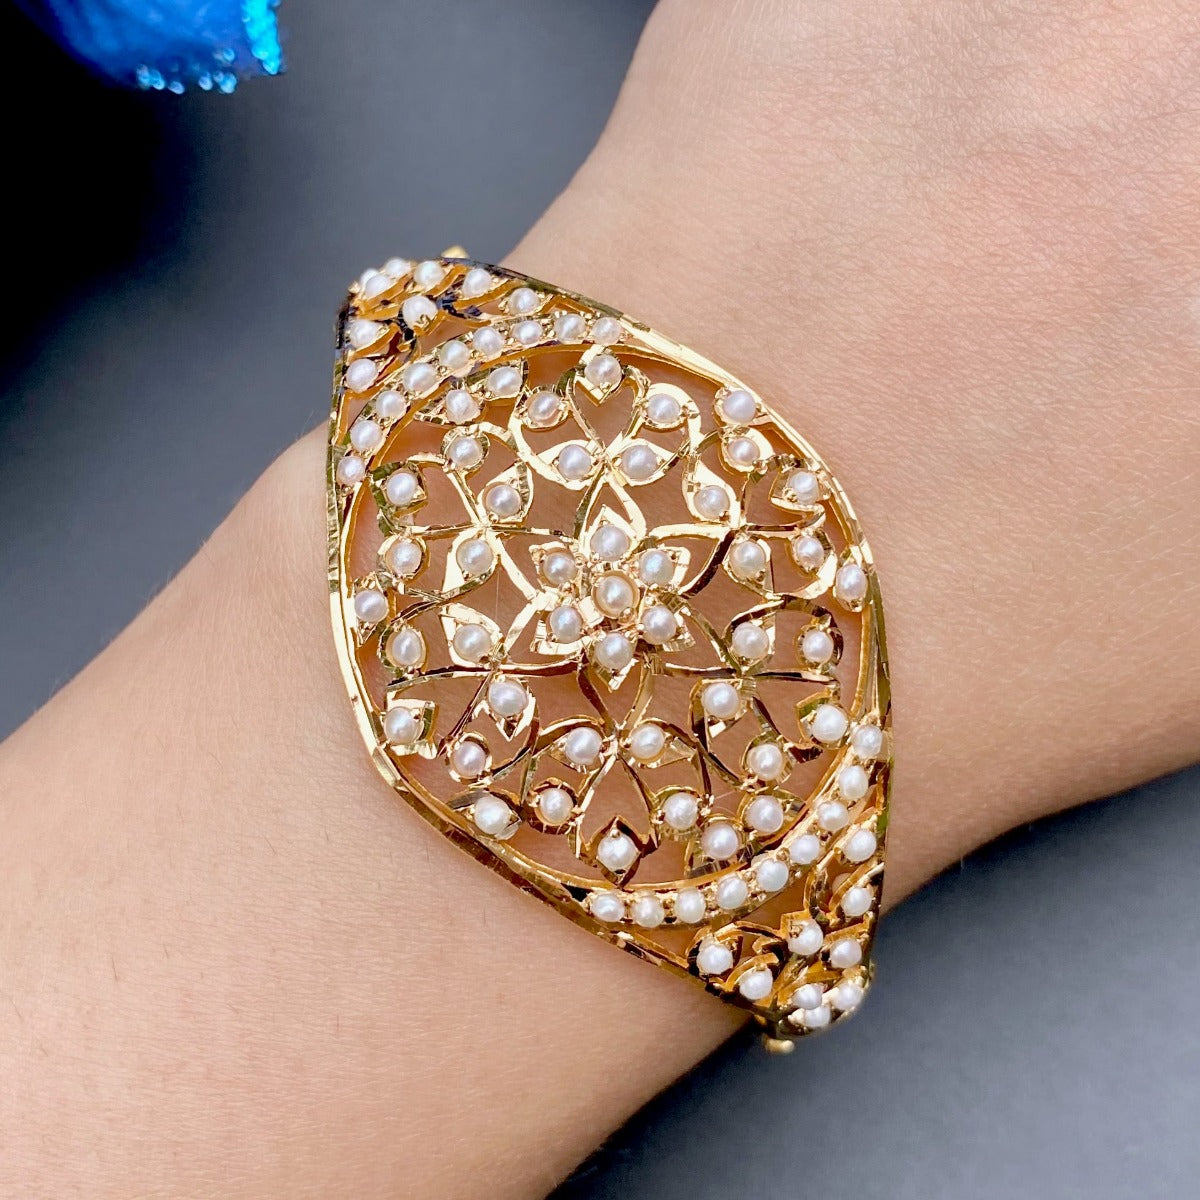 22k gold bracelet for ladies studded with pearls